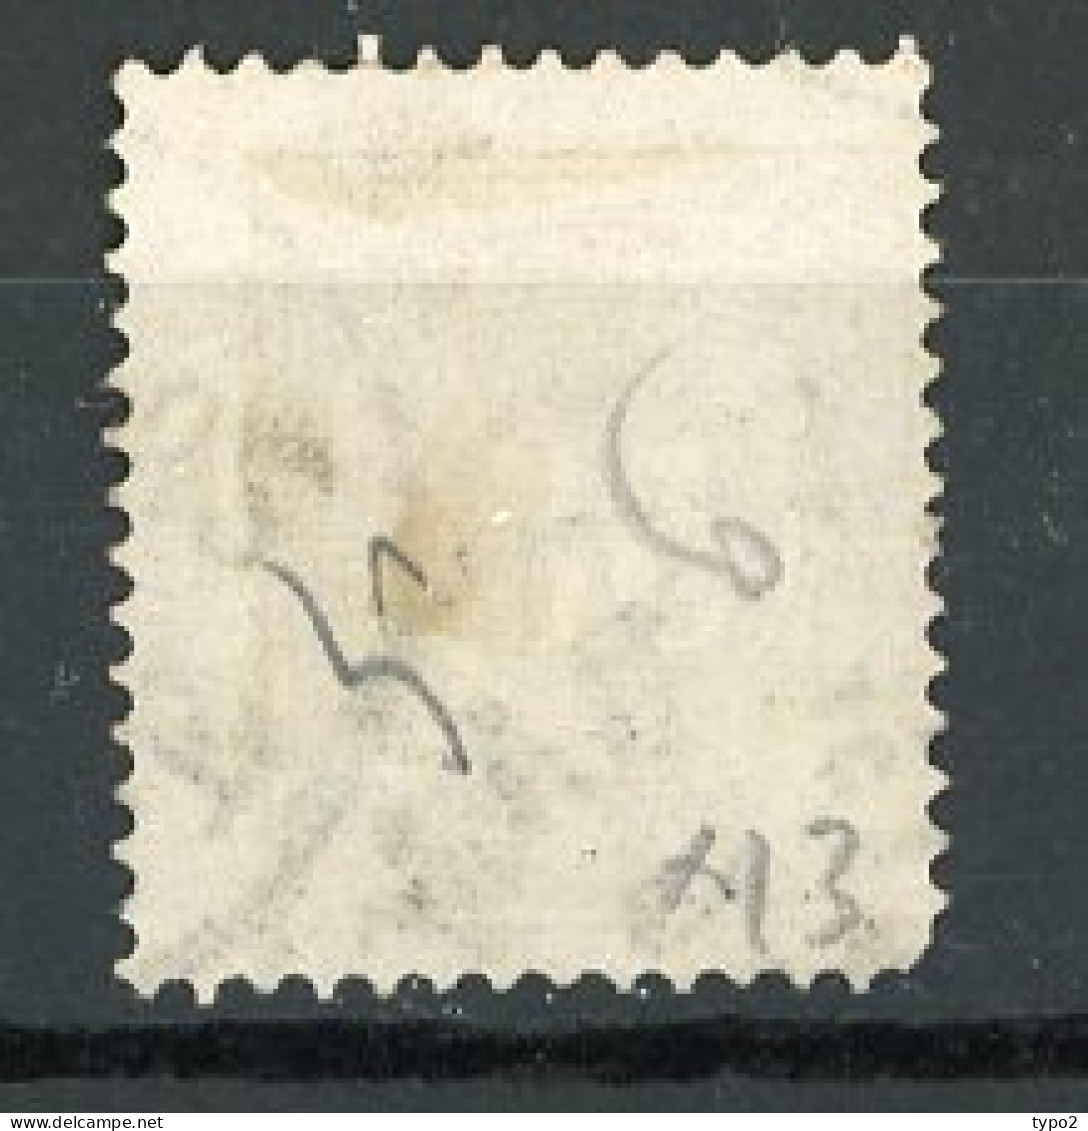 SUE TAXE Yv. N° 9 Dent. 13  (o)  50 ö  Bistre  Cote  7 Euro BE R 2 Scans - Postage Due